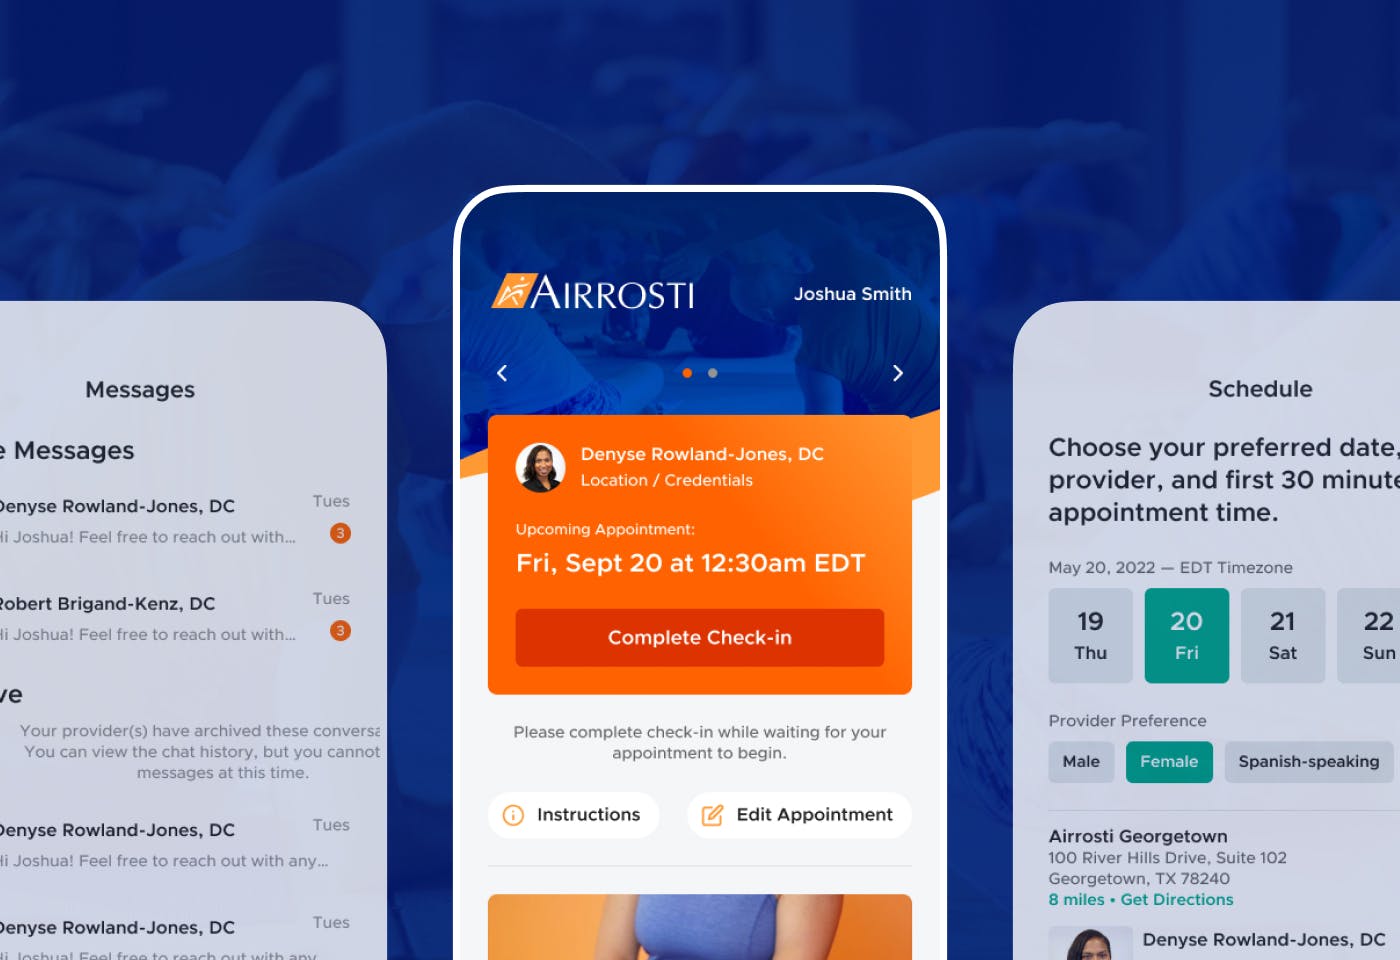 Mobile screenshots of the Airrosti mobile app on a blue background.